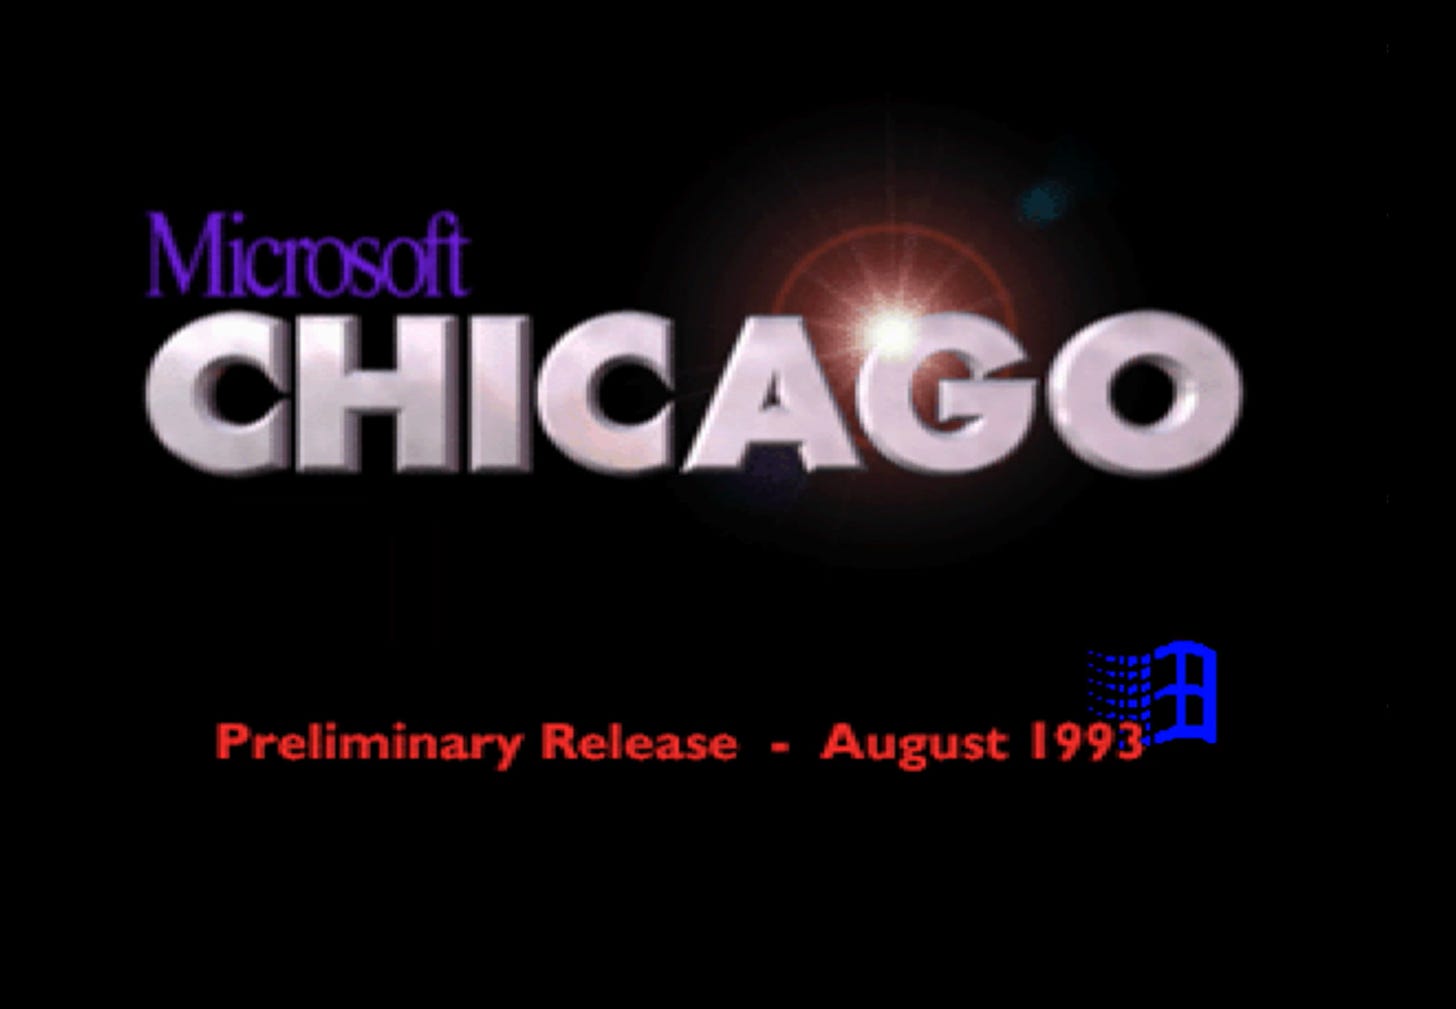 The Chicago boot screen August 1993.